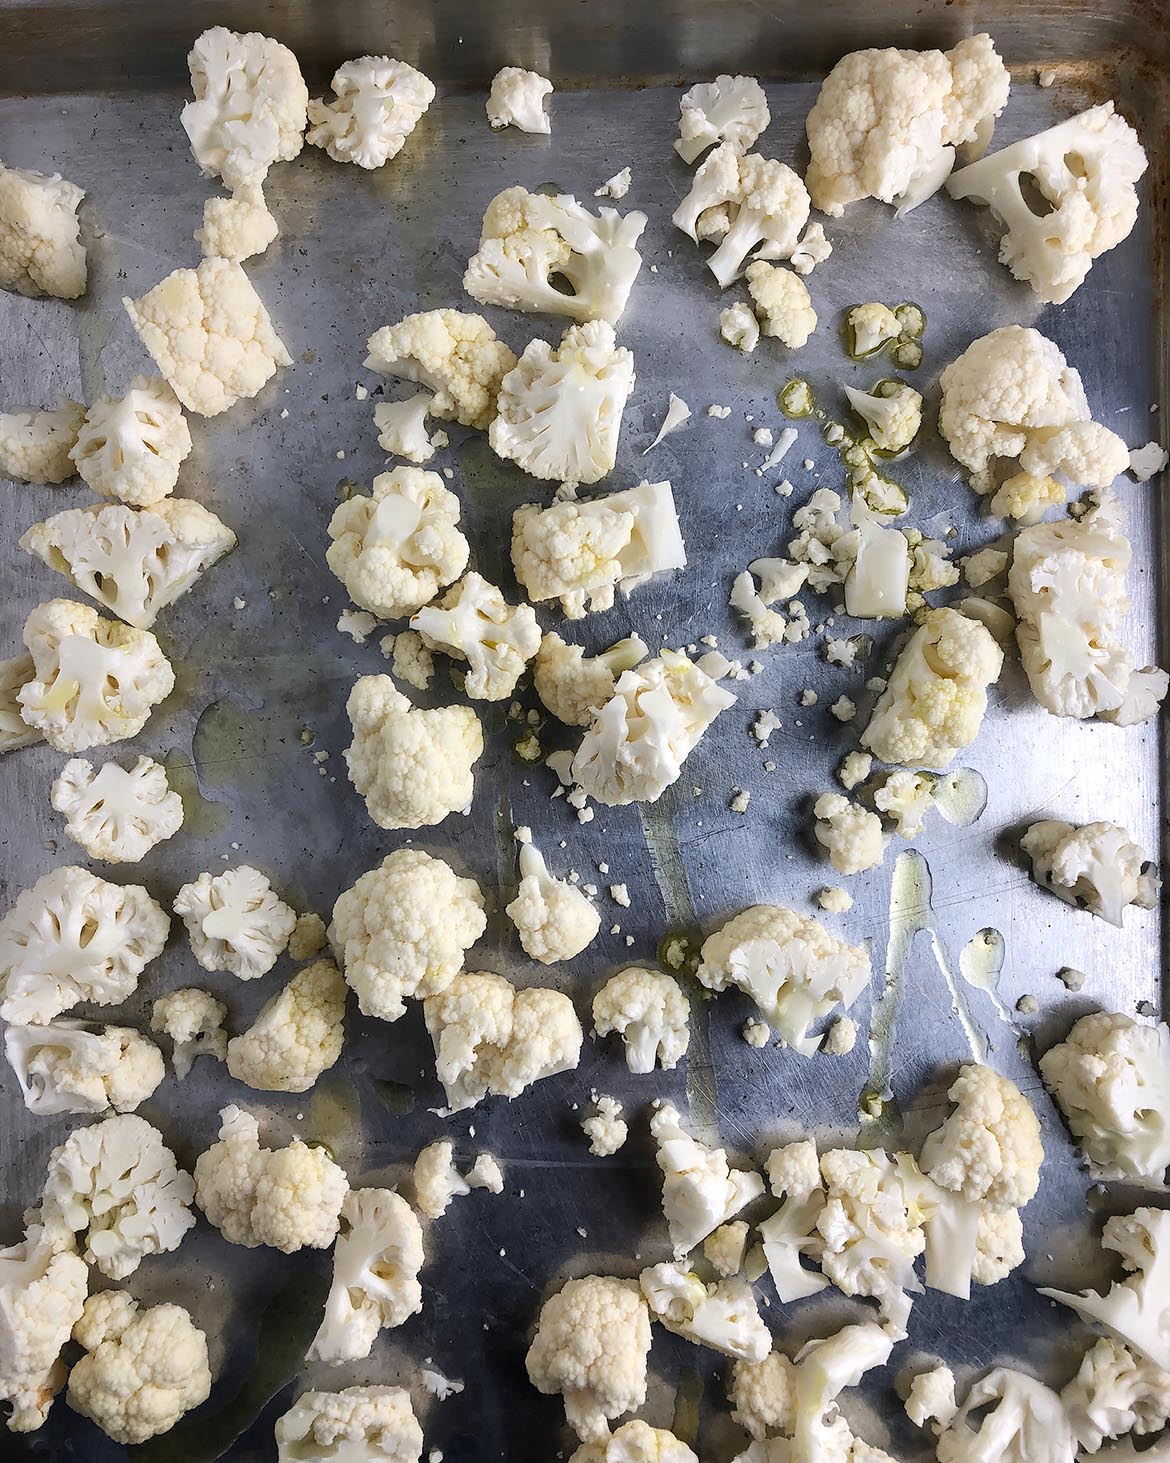 Topdown view of chopped cauliflower on a roasting pan, drizzled with olive oil